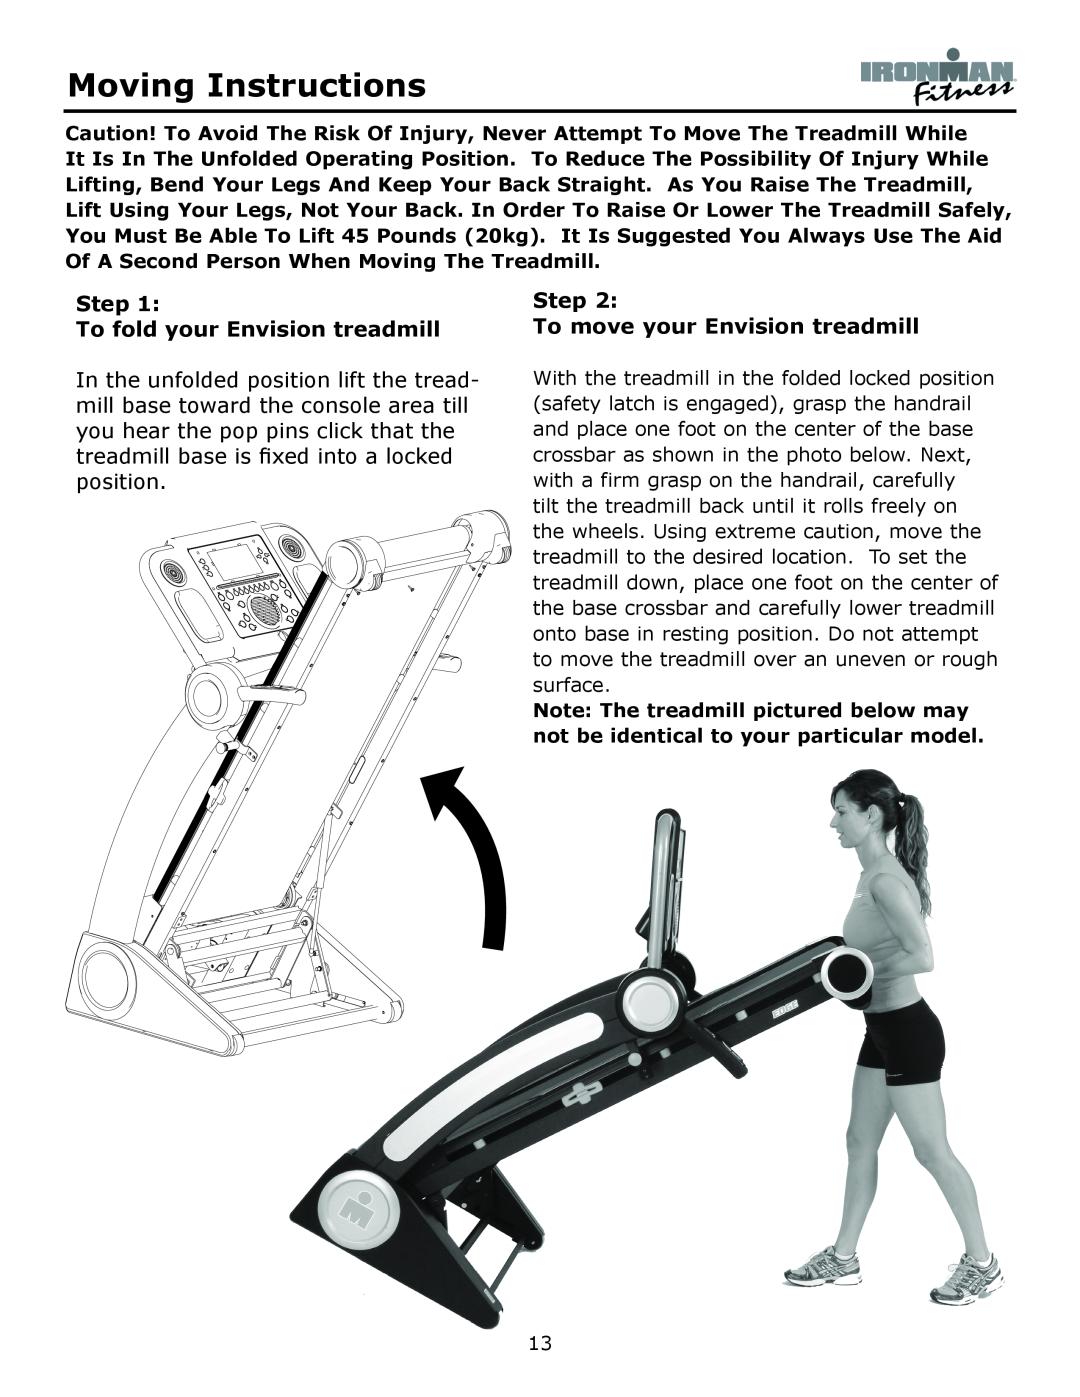 Ironman Fitness Moving Instructions, Step To fold your Envision treadmill, Step To move your Envision treadmill 